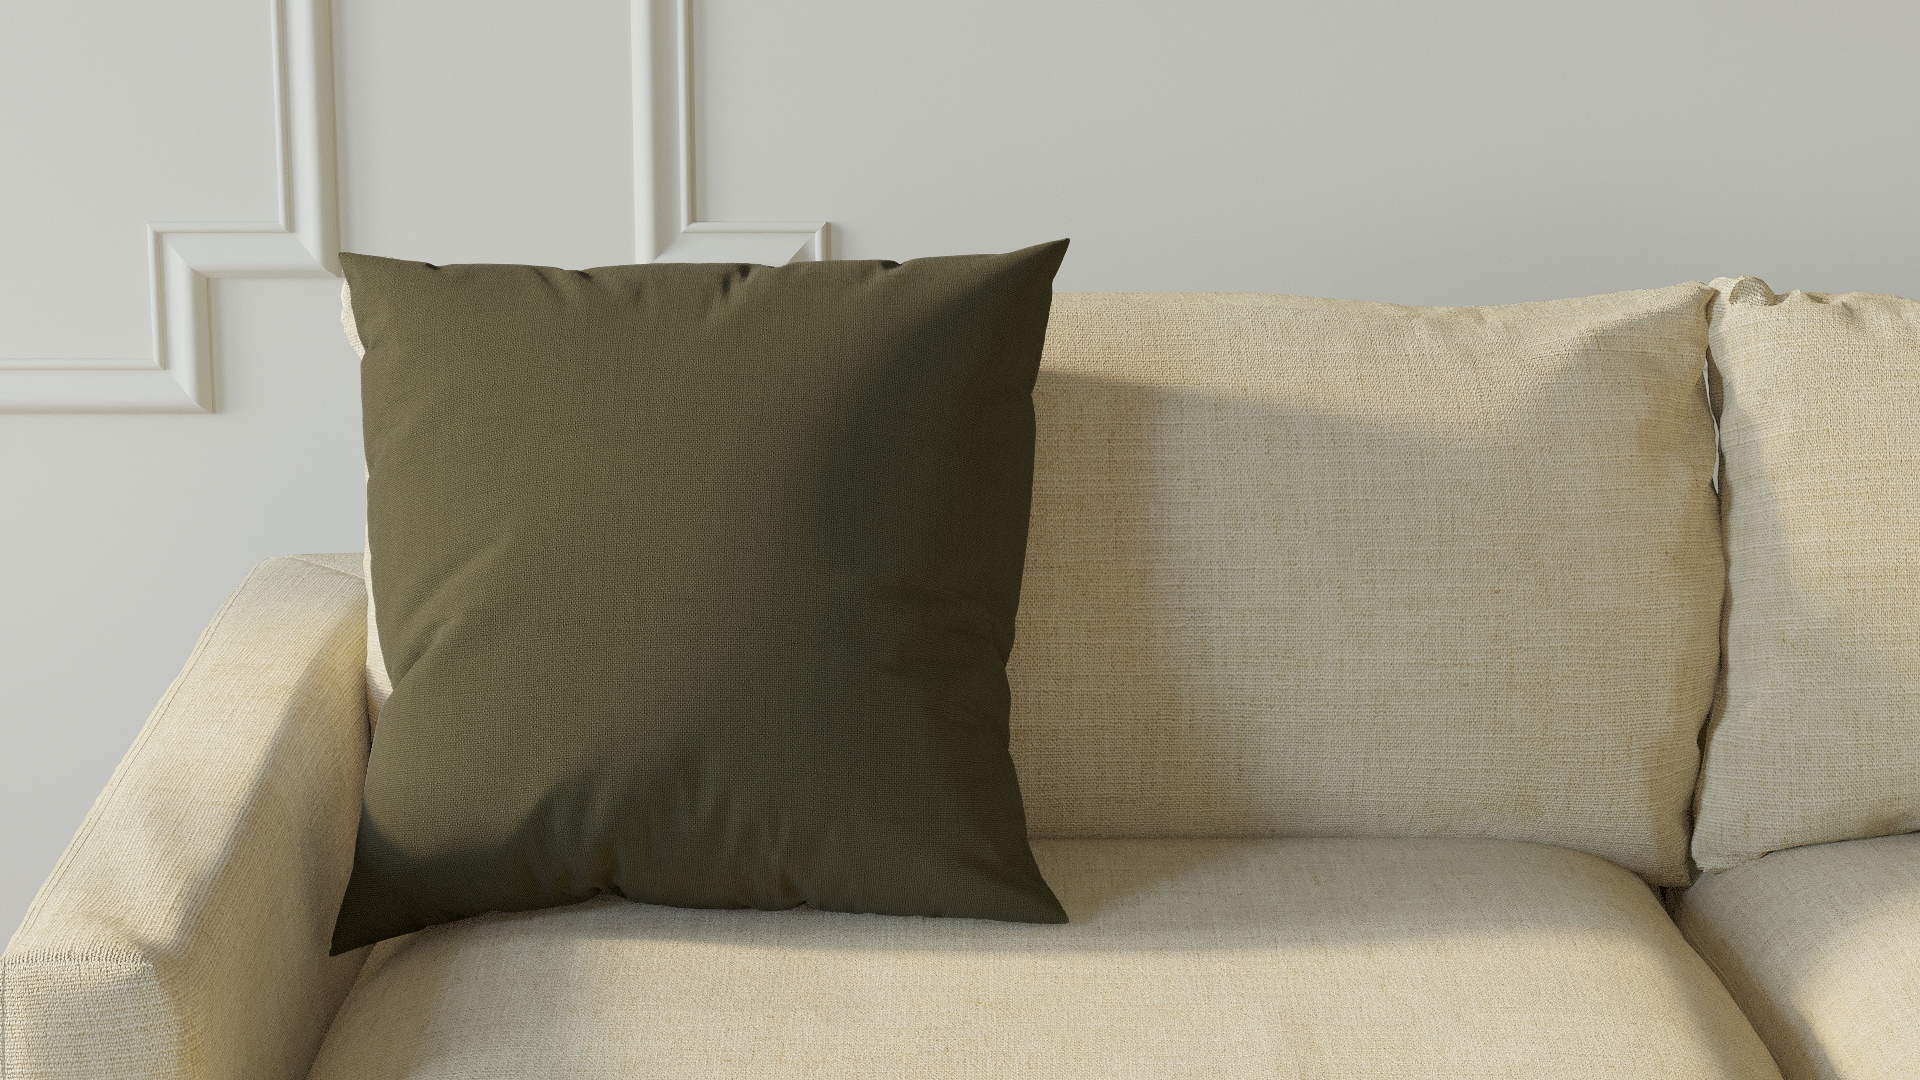 Throw Pillow 20", Olive Everyday Linen, 20" x 20" - Image 2